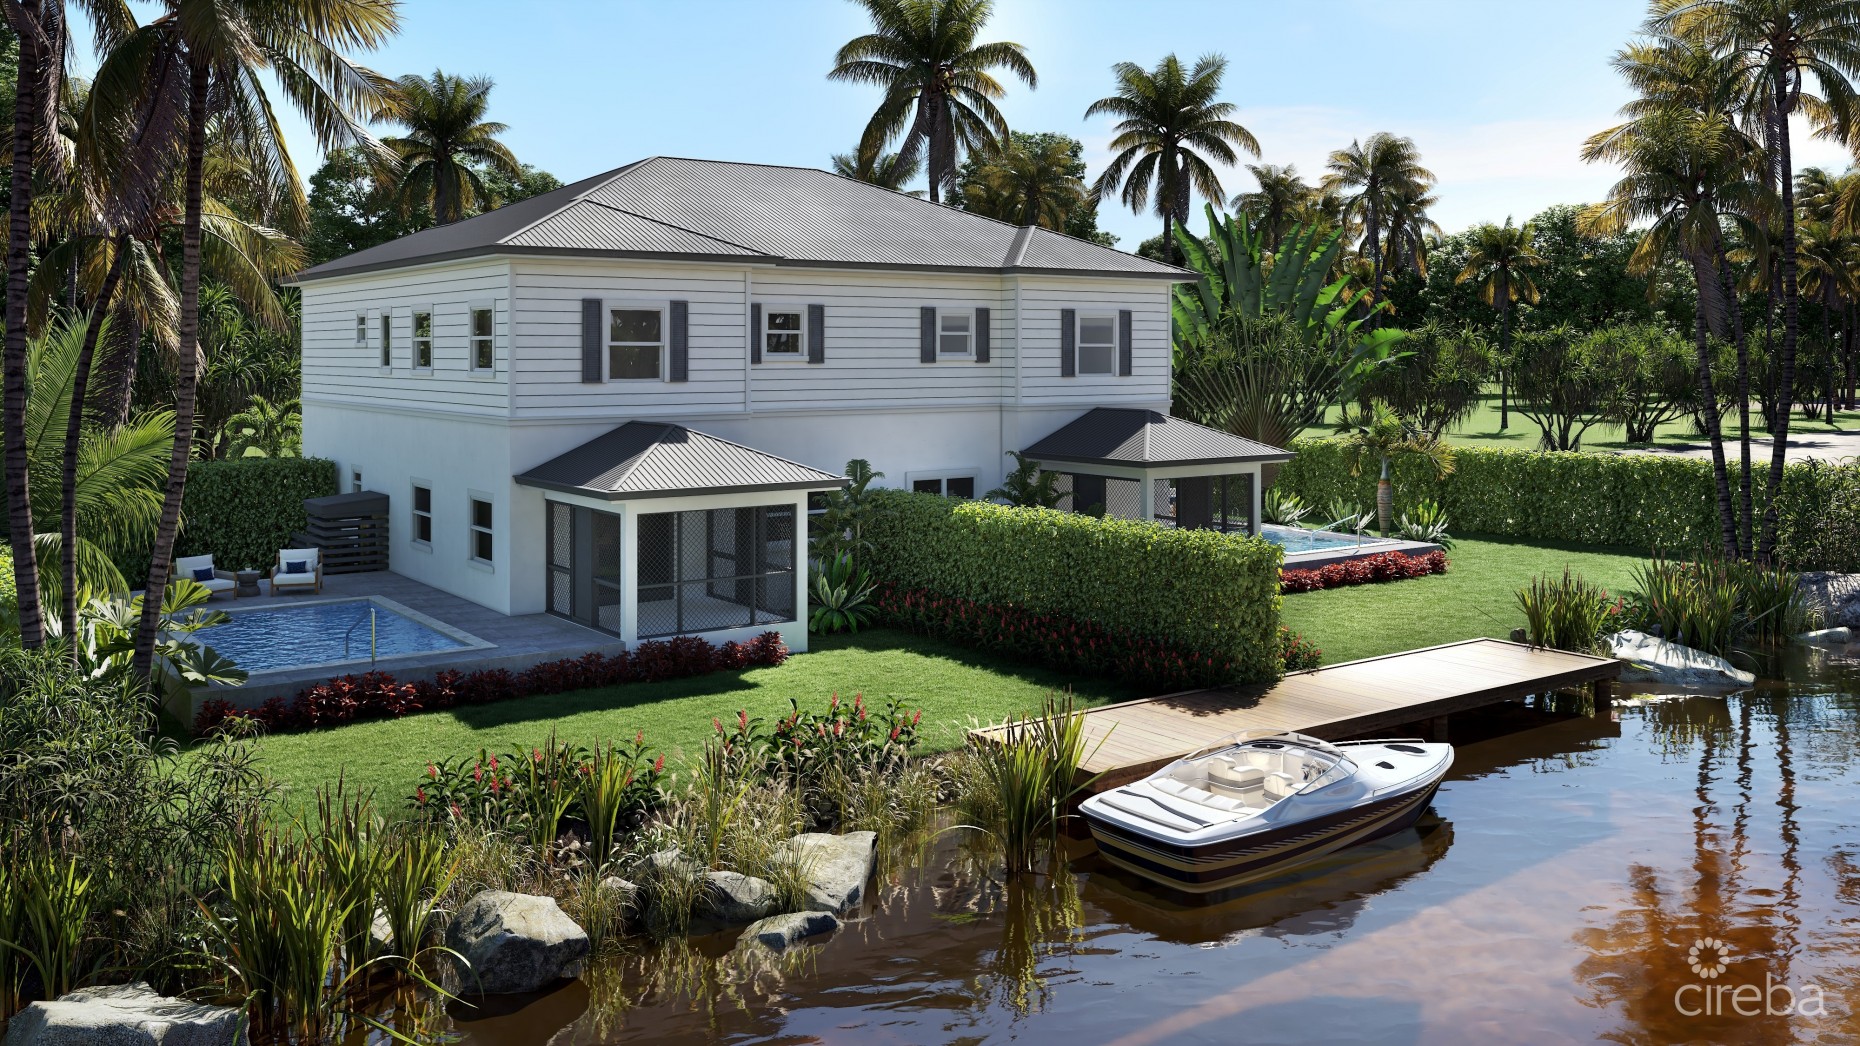 NEW CANAL FRONT  DUPLEX INVESTMENT PROPERTY